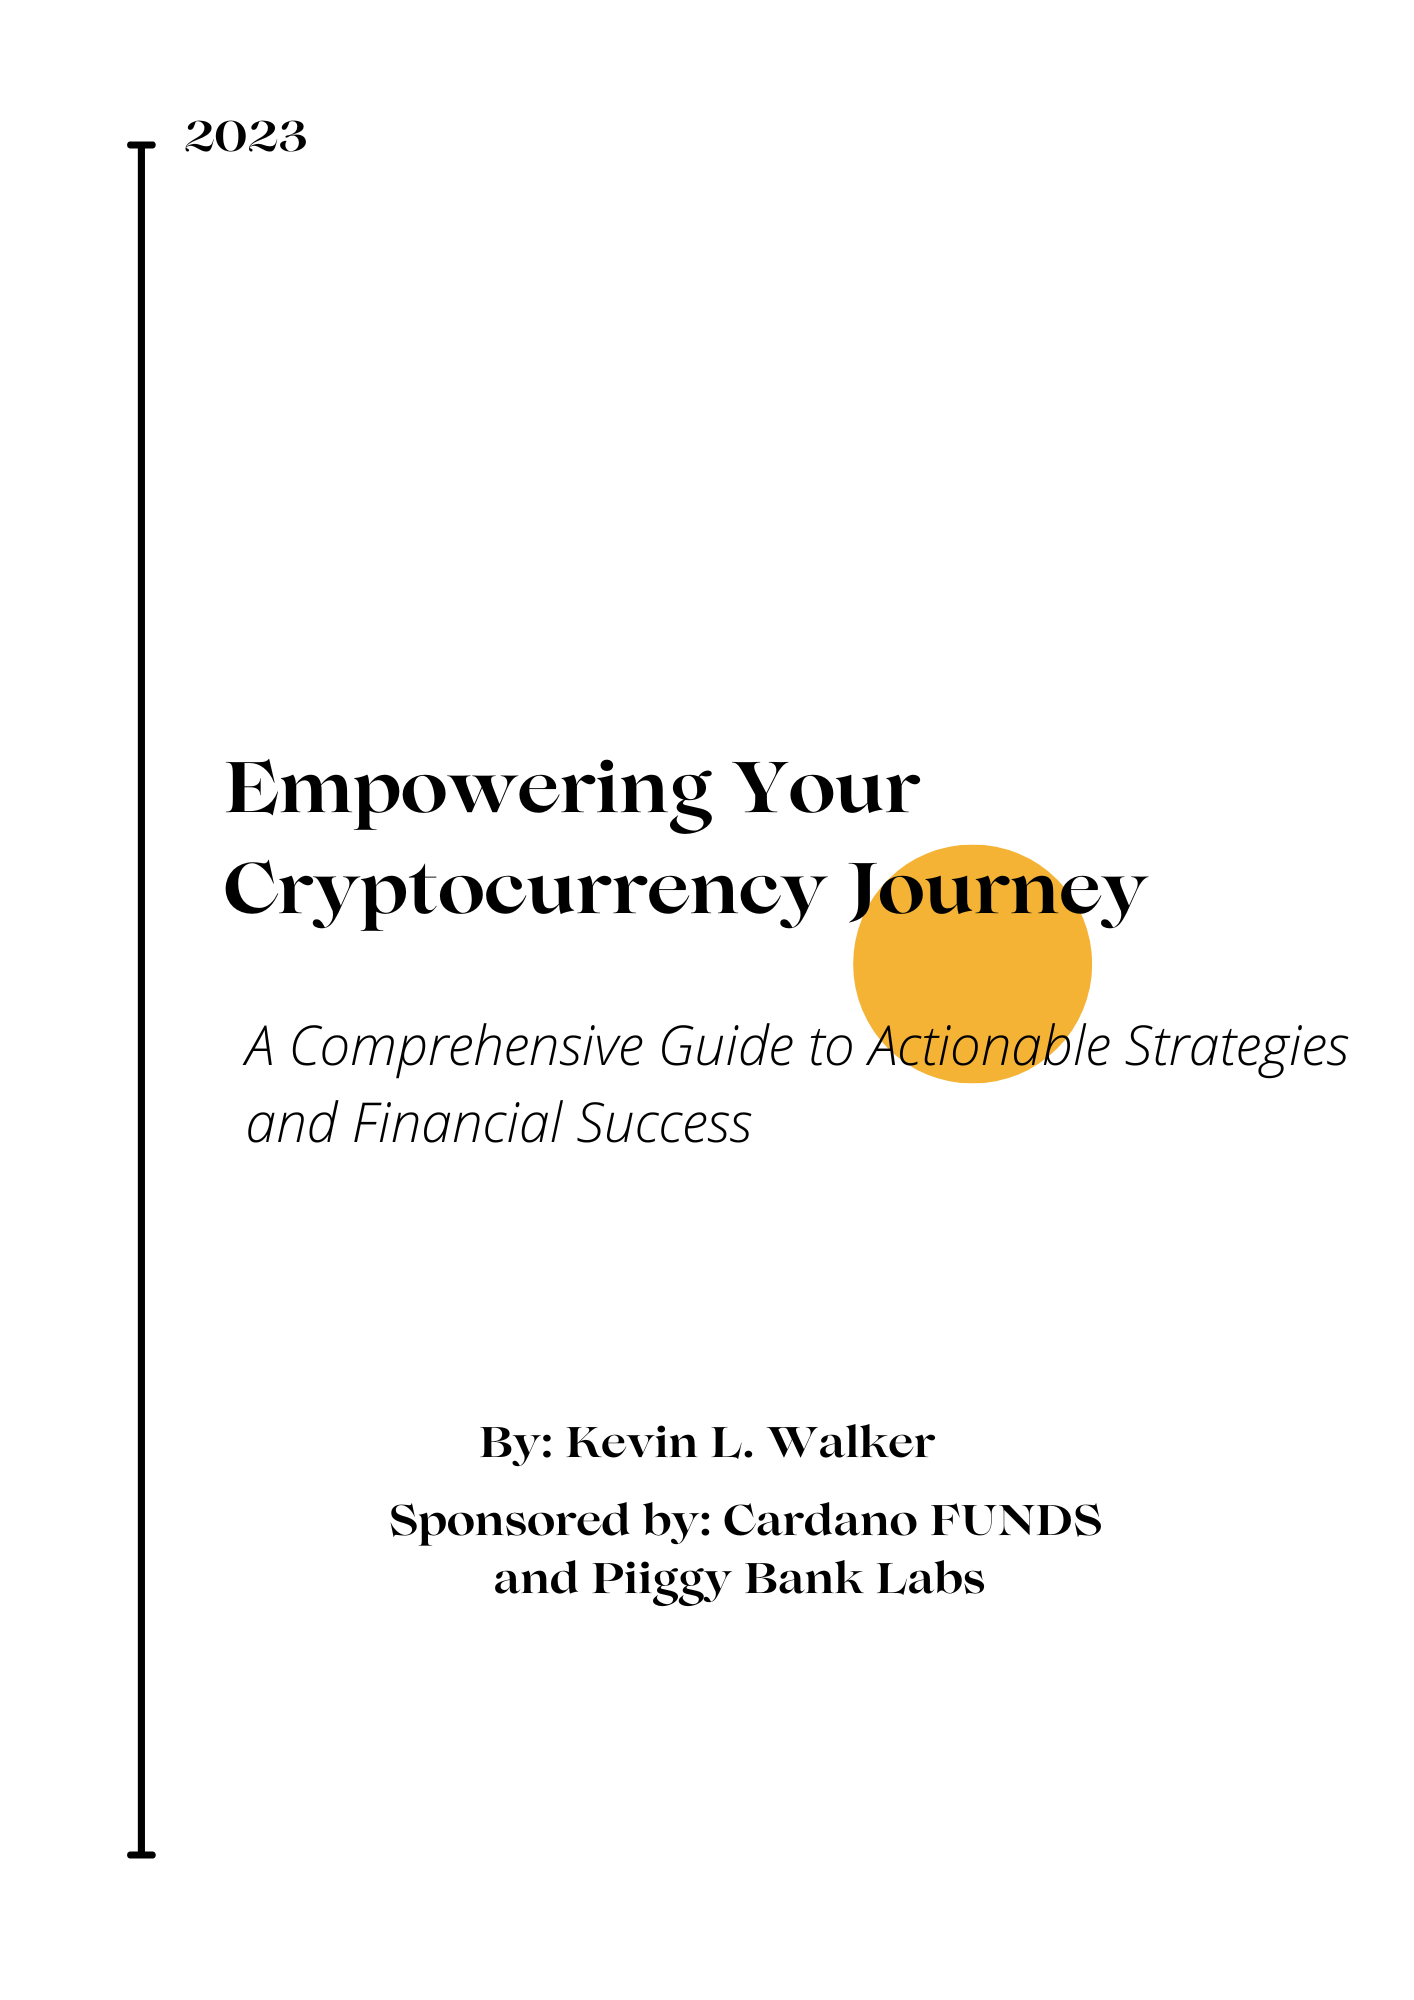 Empowering Your Cryptocurrency Journey: A Comprehensive Guide to Actionable Strategies and Financial Success